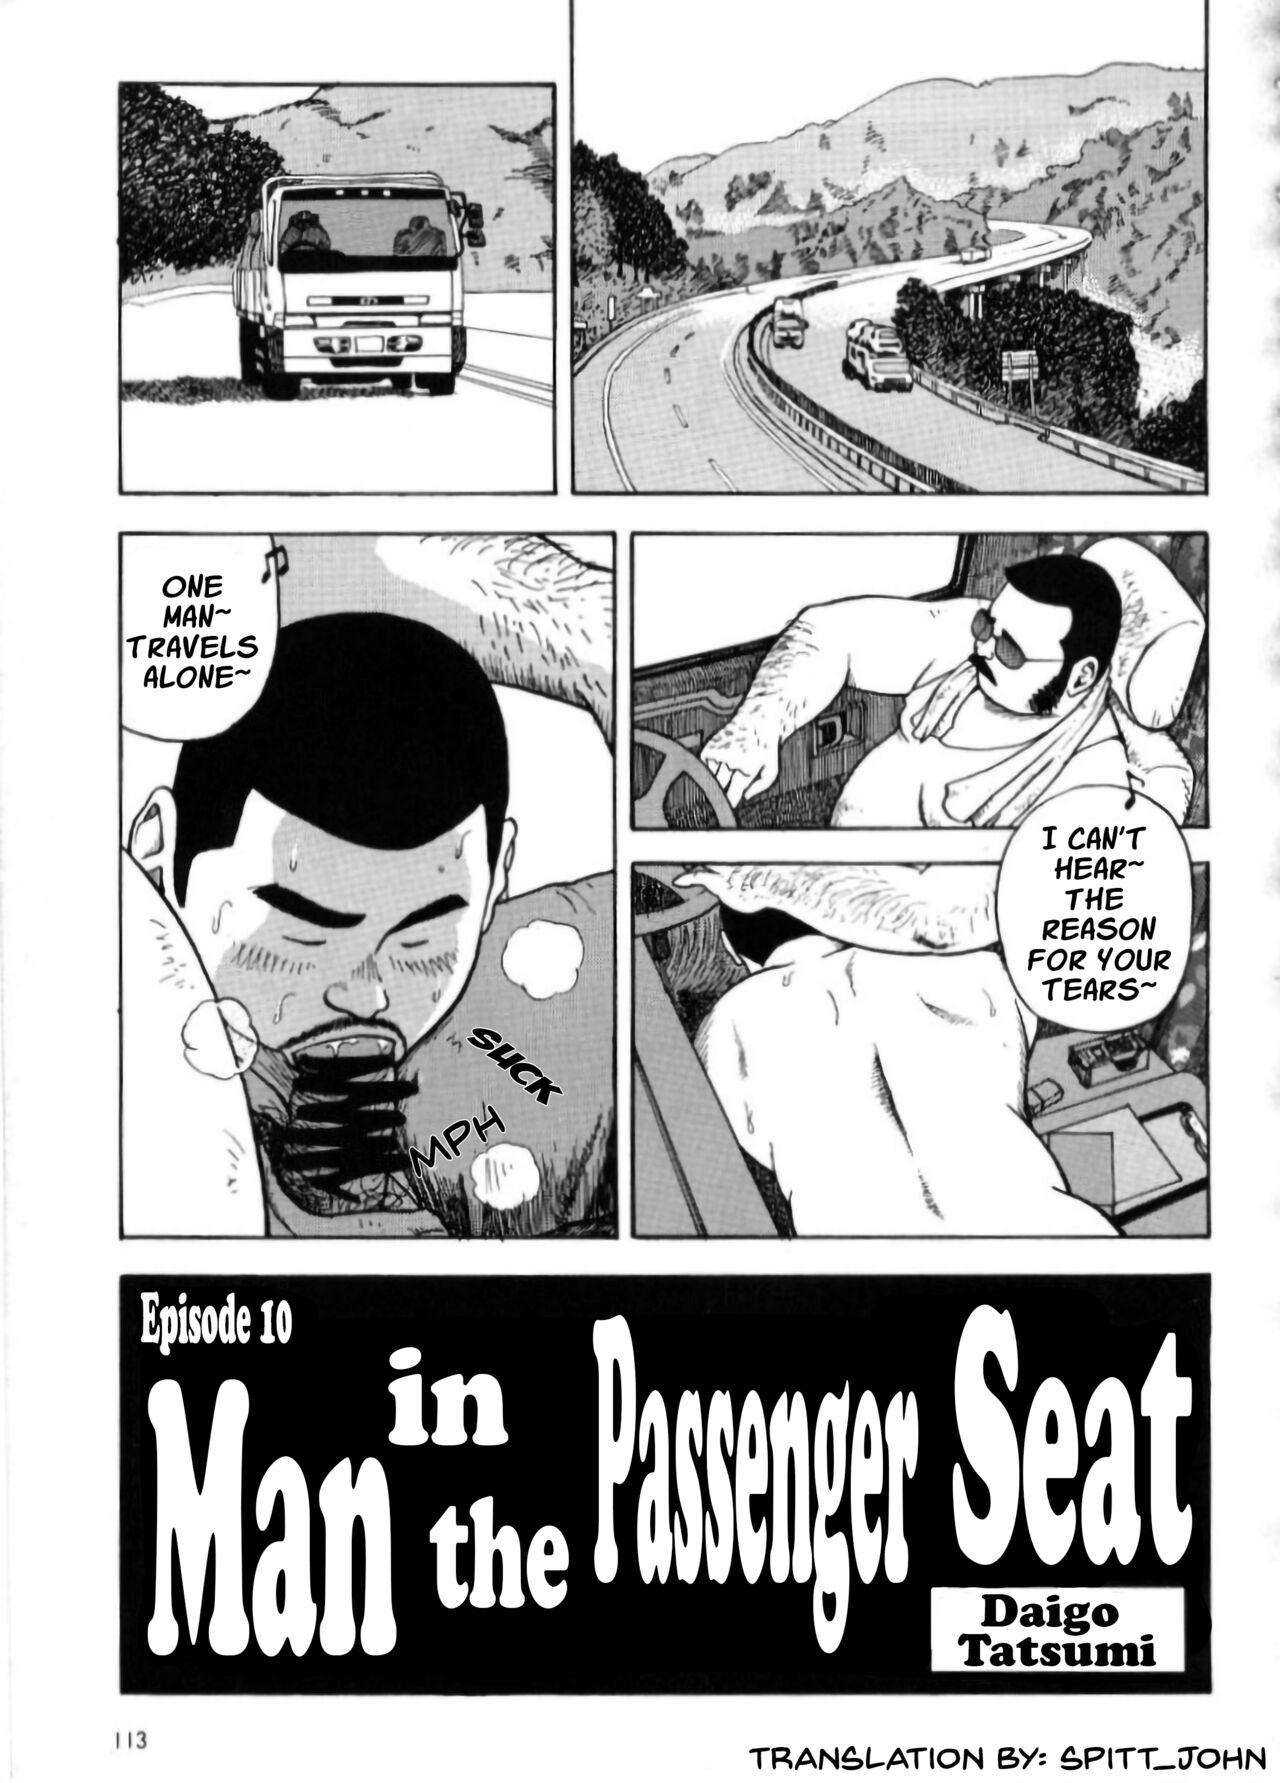 Shoplifter I Like You - Man in the Passenger Seat Sentones - Page 1